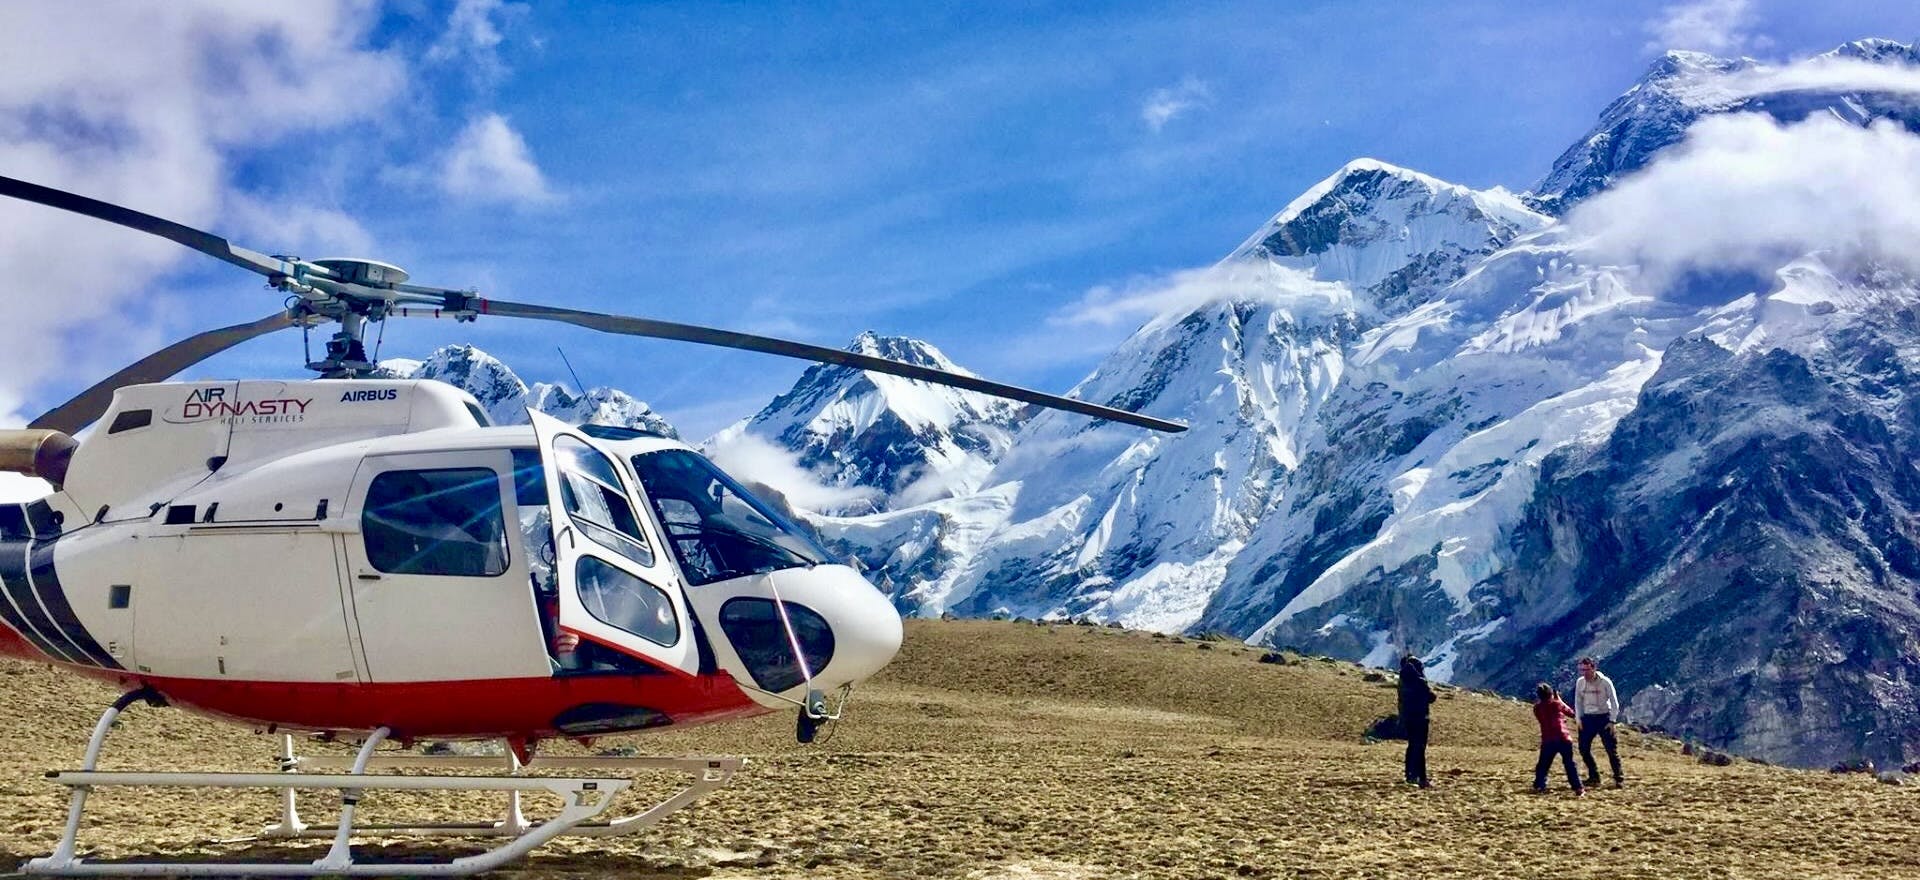 Age limit on the Everest Base Camp Helicopter Tour